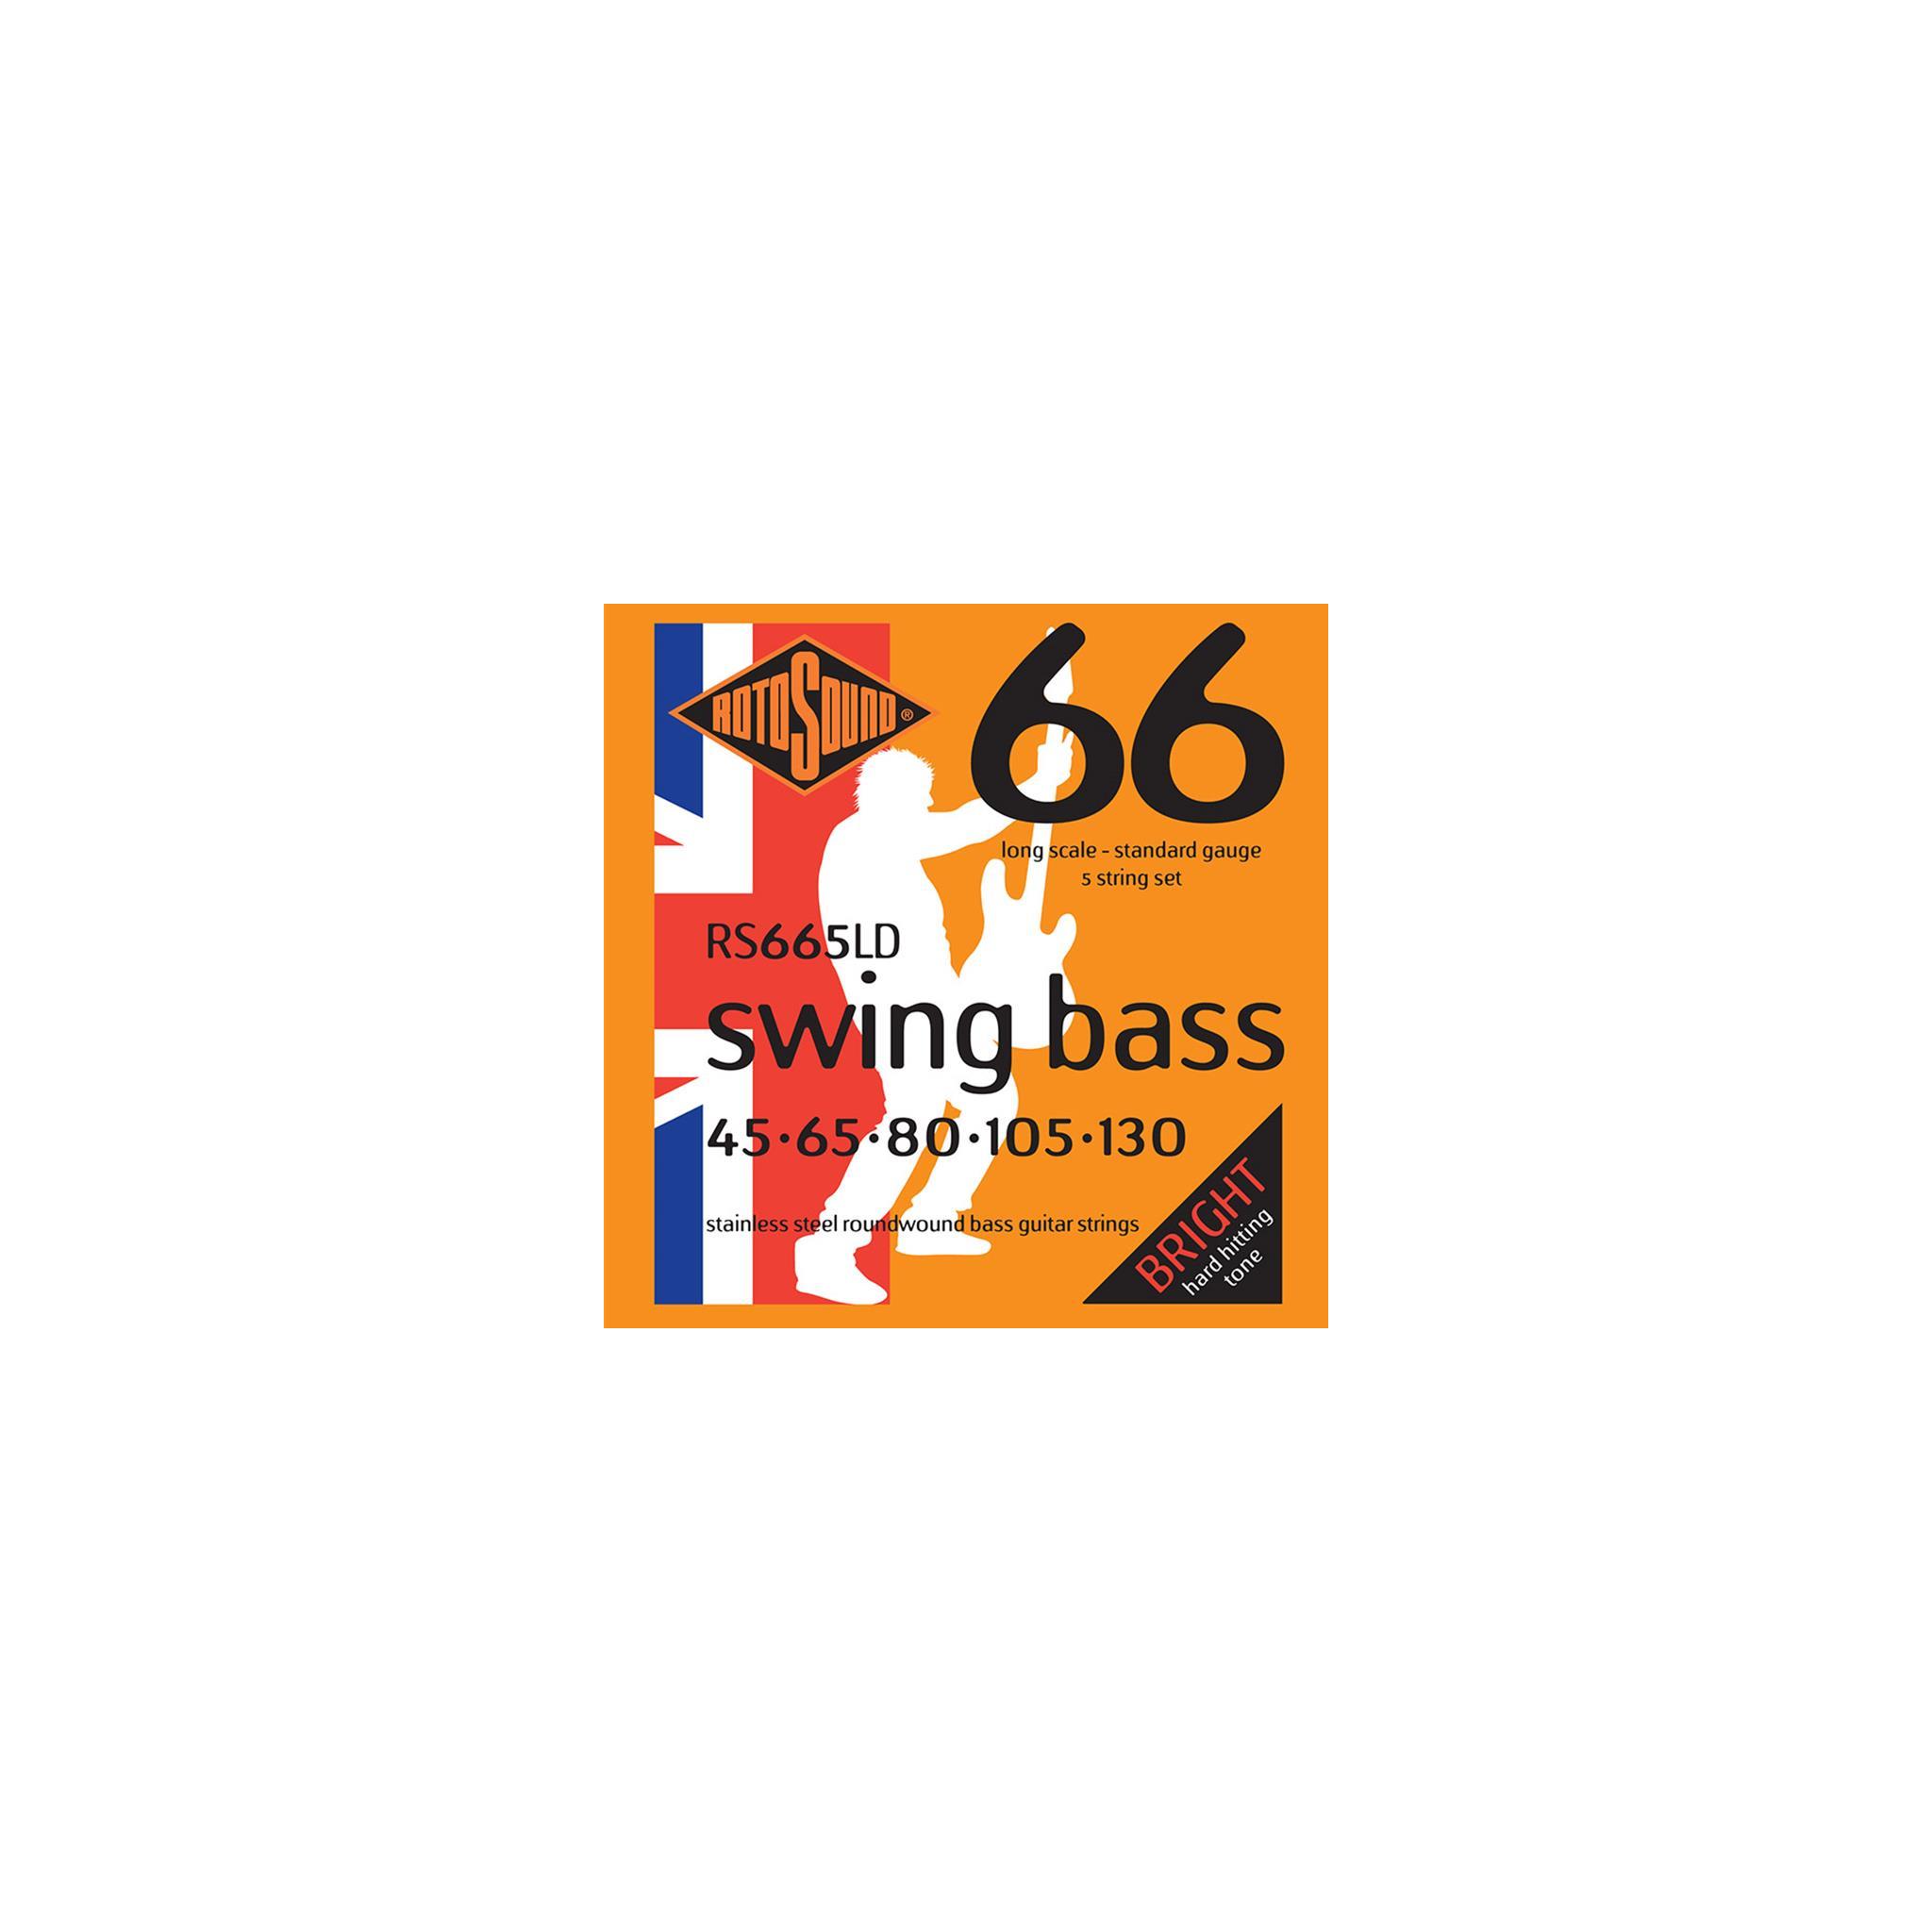 Rotosound Rs665Ld Swing Bass Guitar 5 Strings